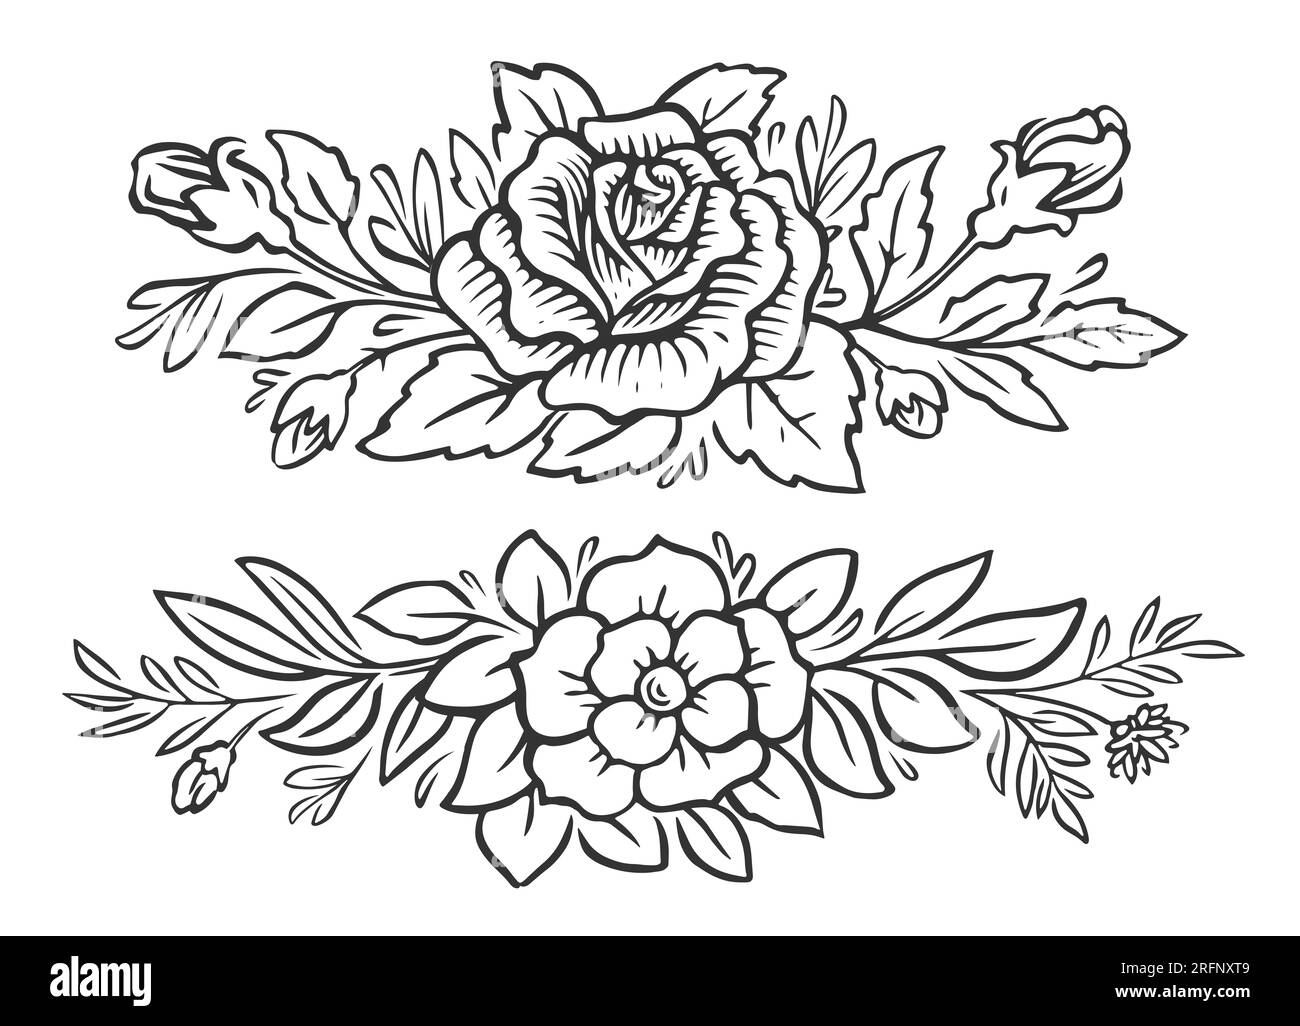 Floral pattern with flowers and leaves. Sketch illustration. Roses vintage border design for greeting card or invitation Stock Photo